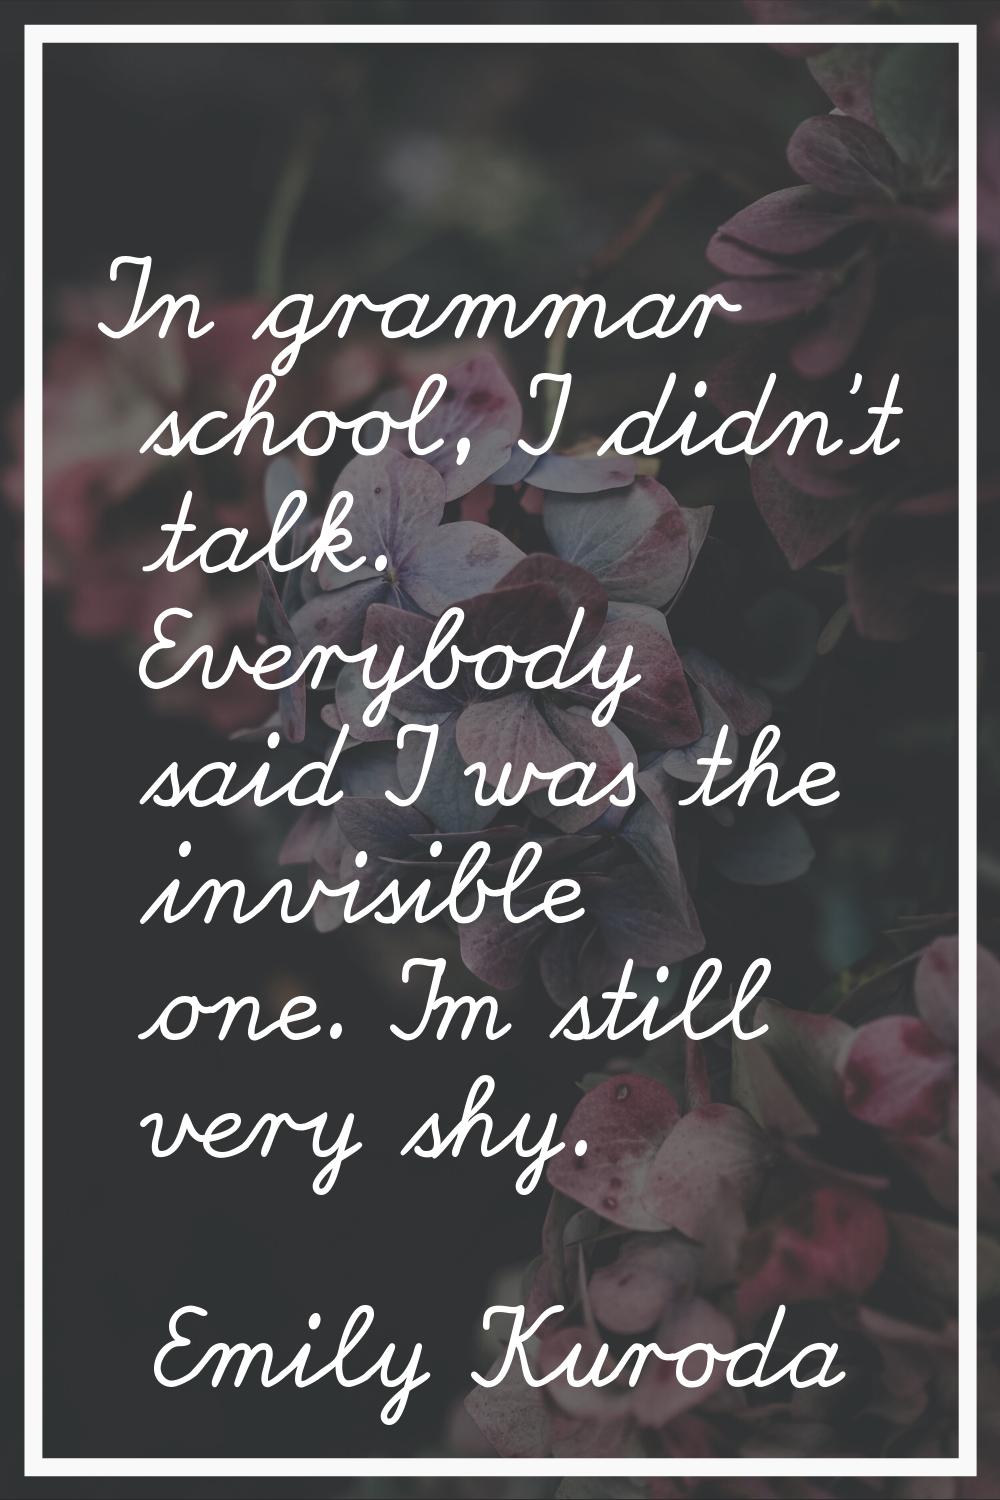 In grammar school, I didn't talk. Everybody said I was the invisible one. I'm still very shy.